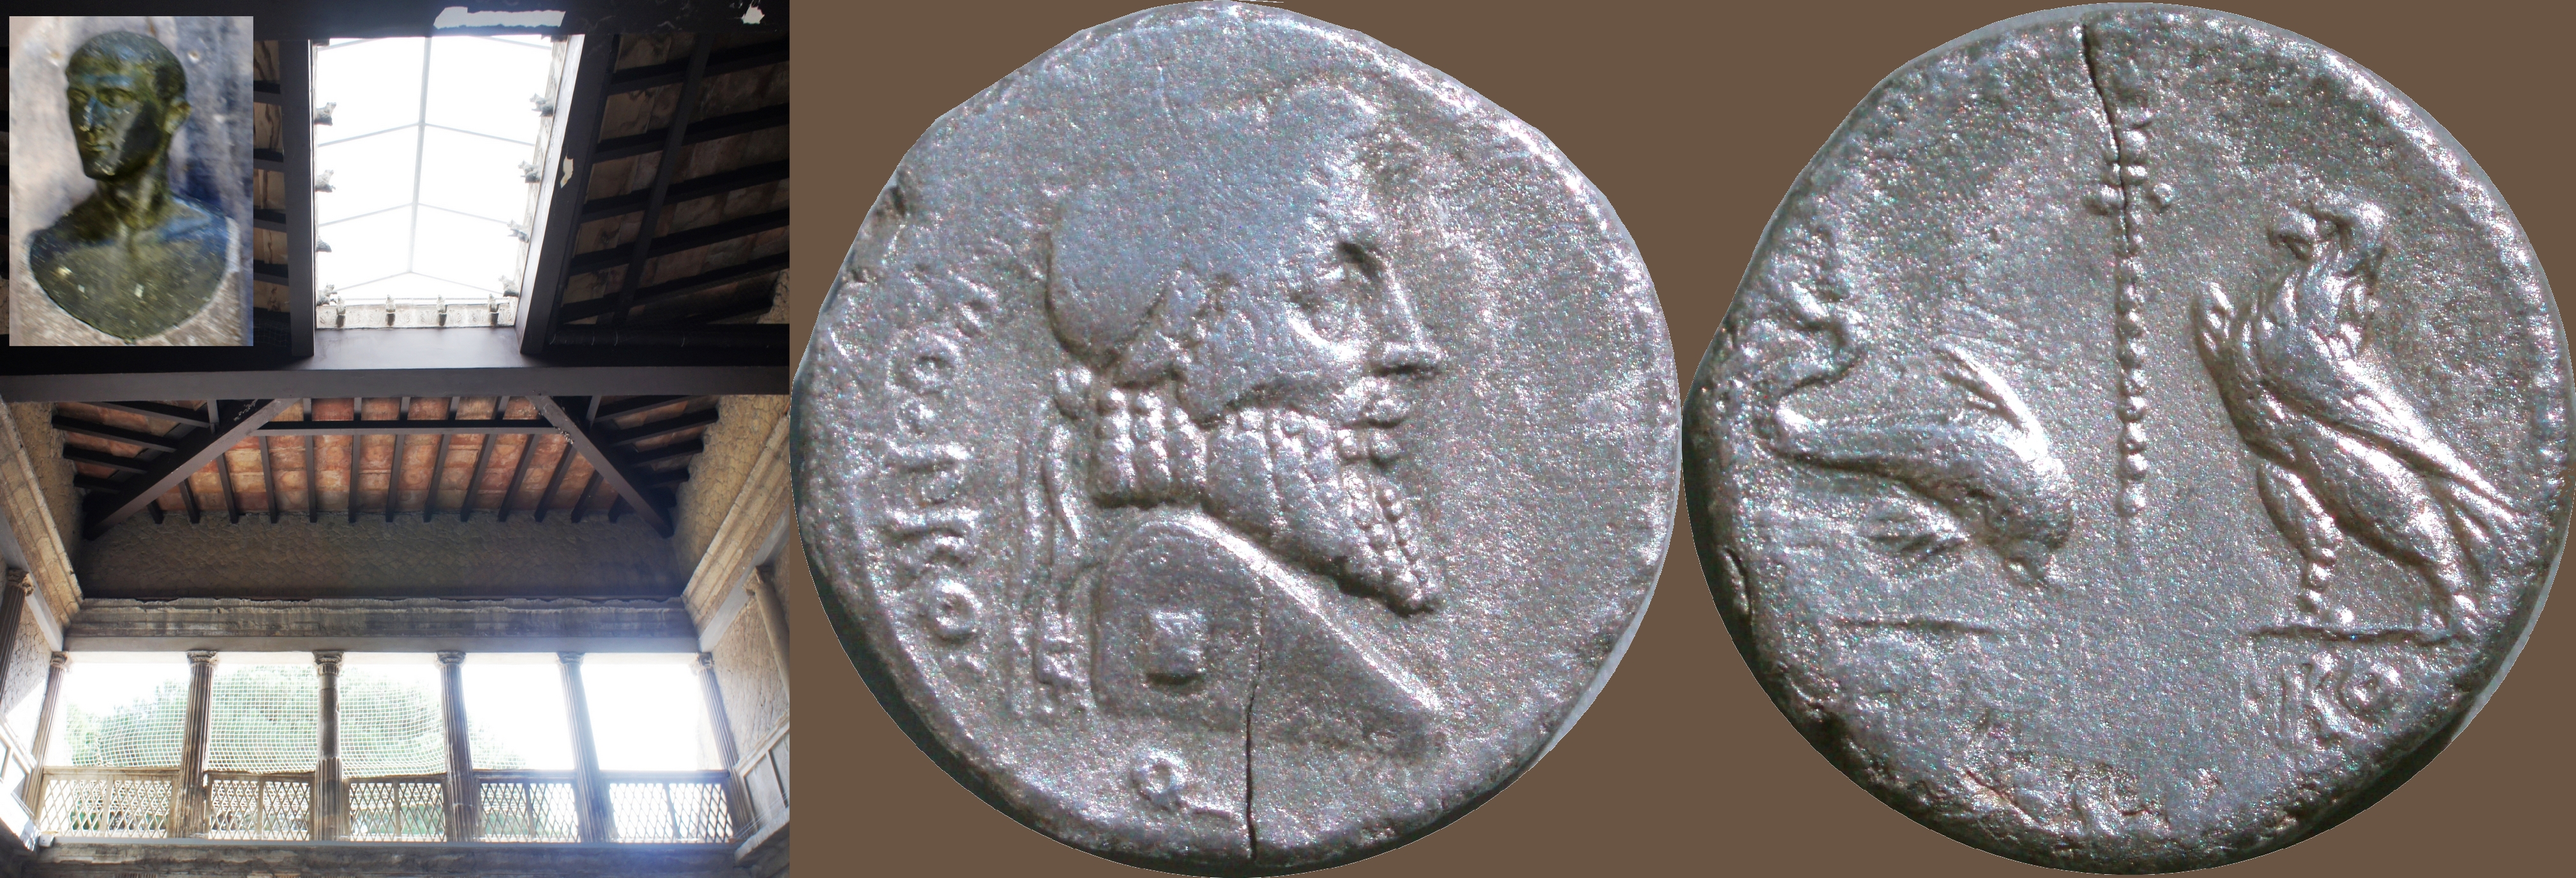 447/1 coin of Pompey the Great 48BC Terminal head of Jupiter, and upper storey of House of the Bronze Herm in Herculaneum with inset its Herm or Terminal Head